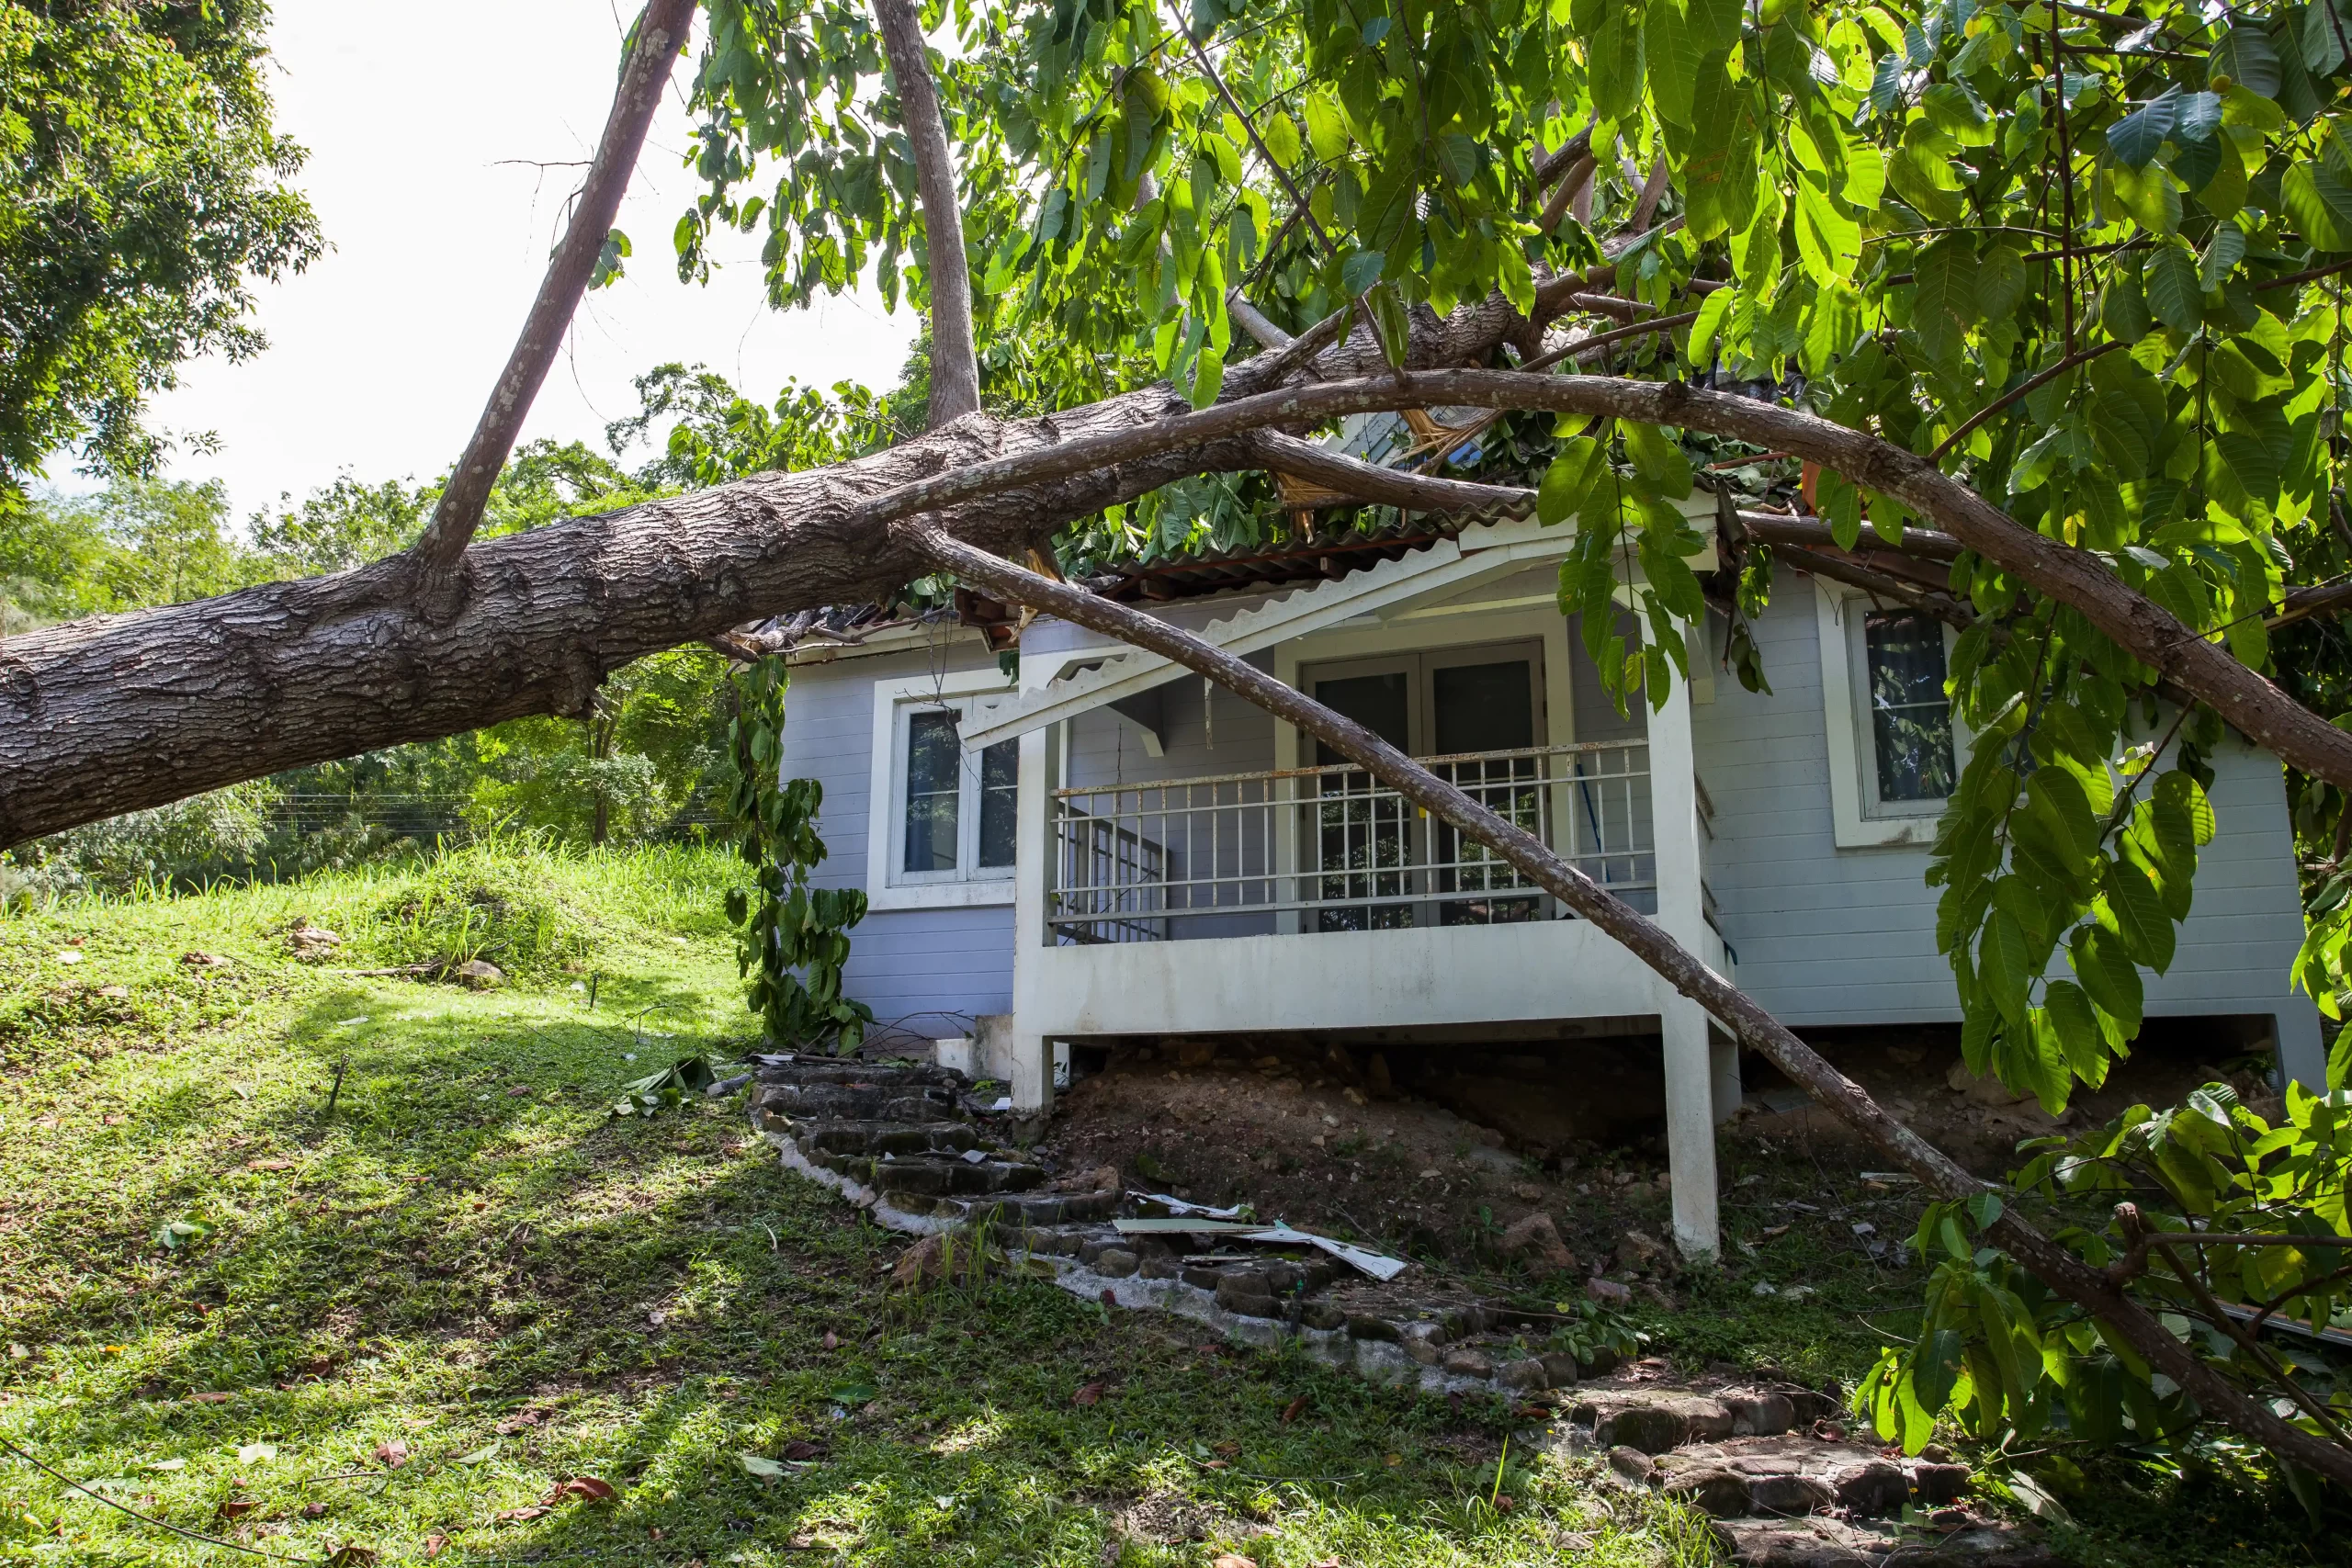 A home with a tree that has fallen on the house during a storm.